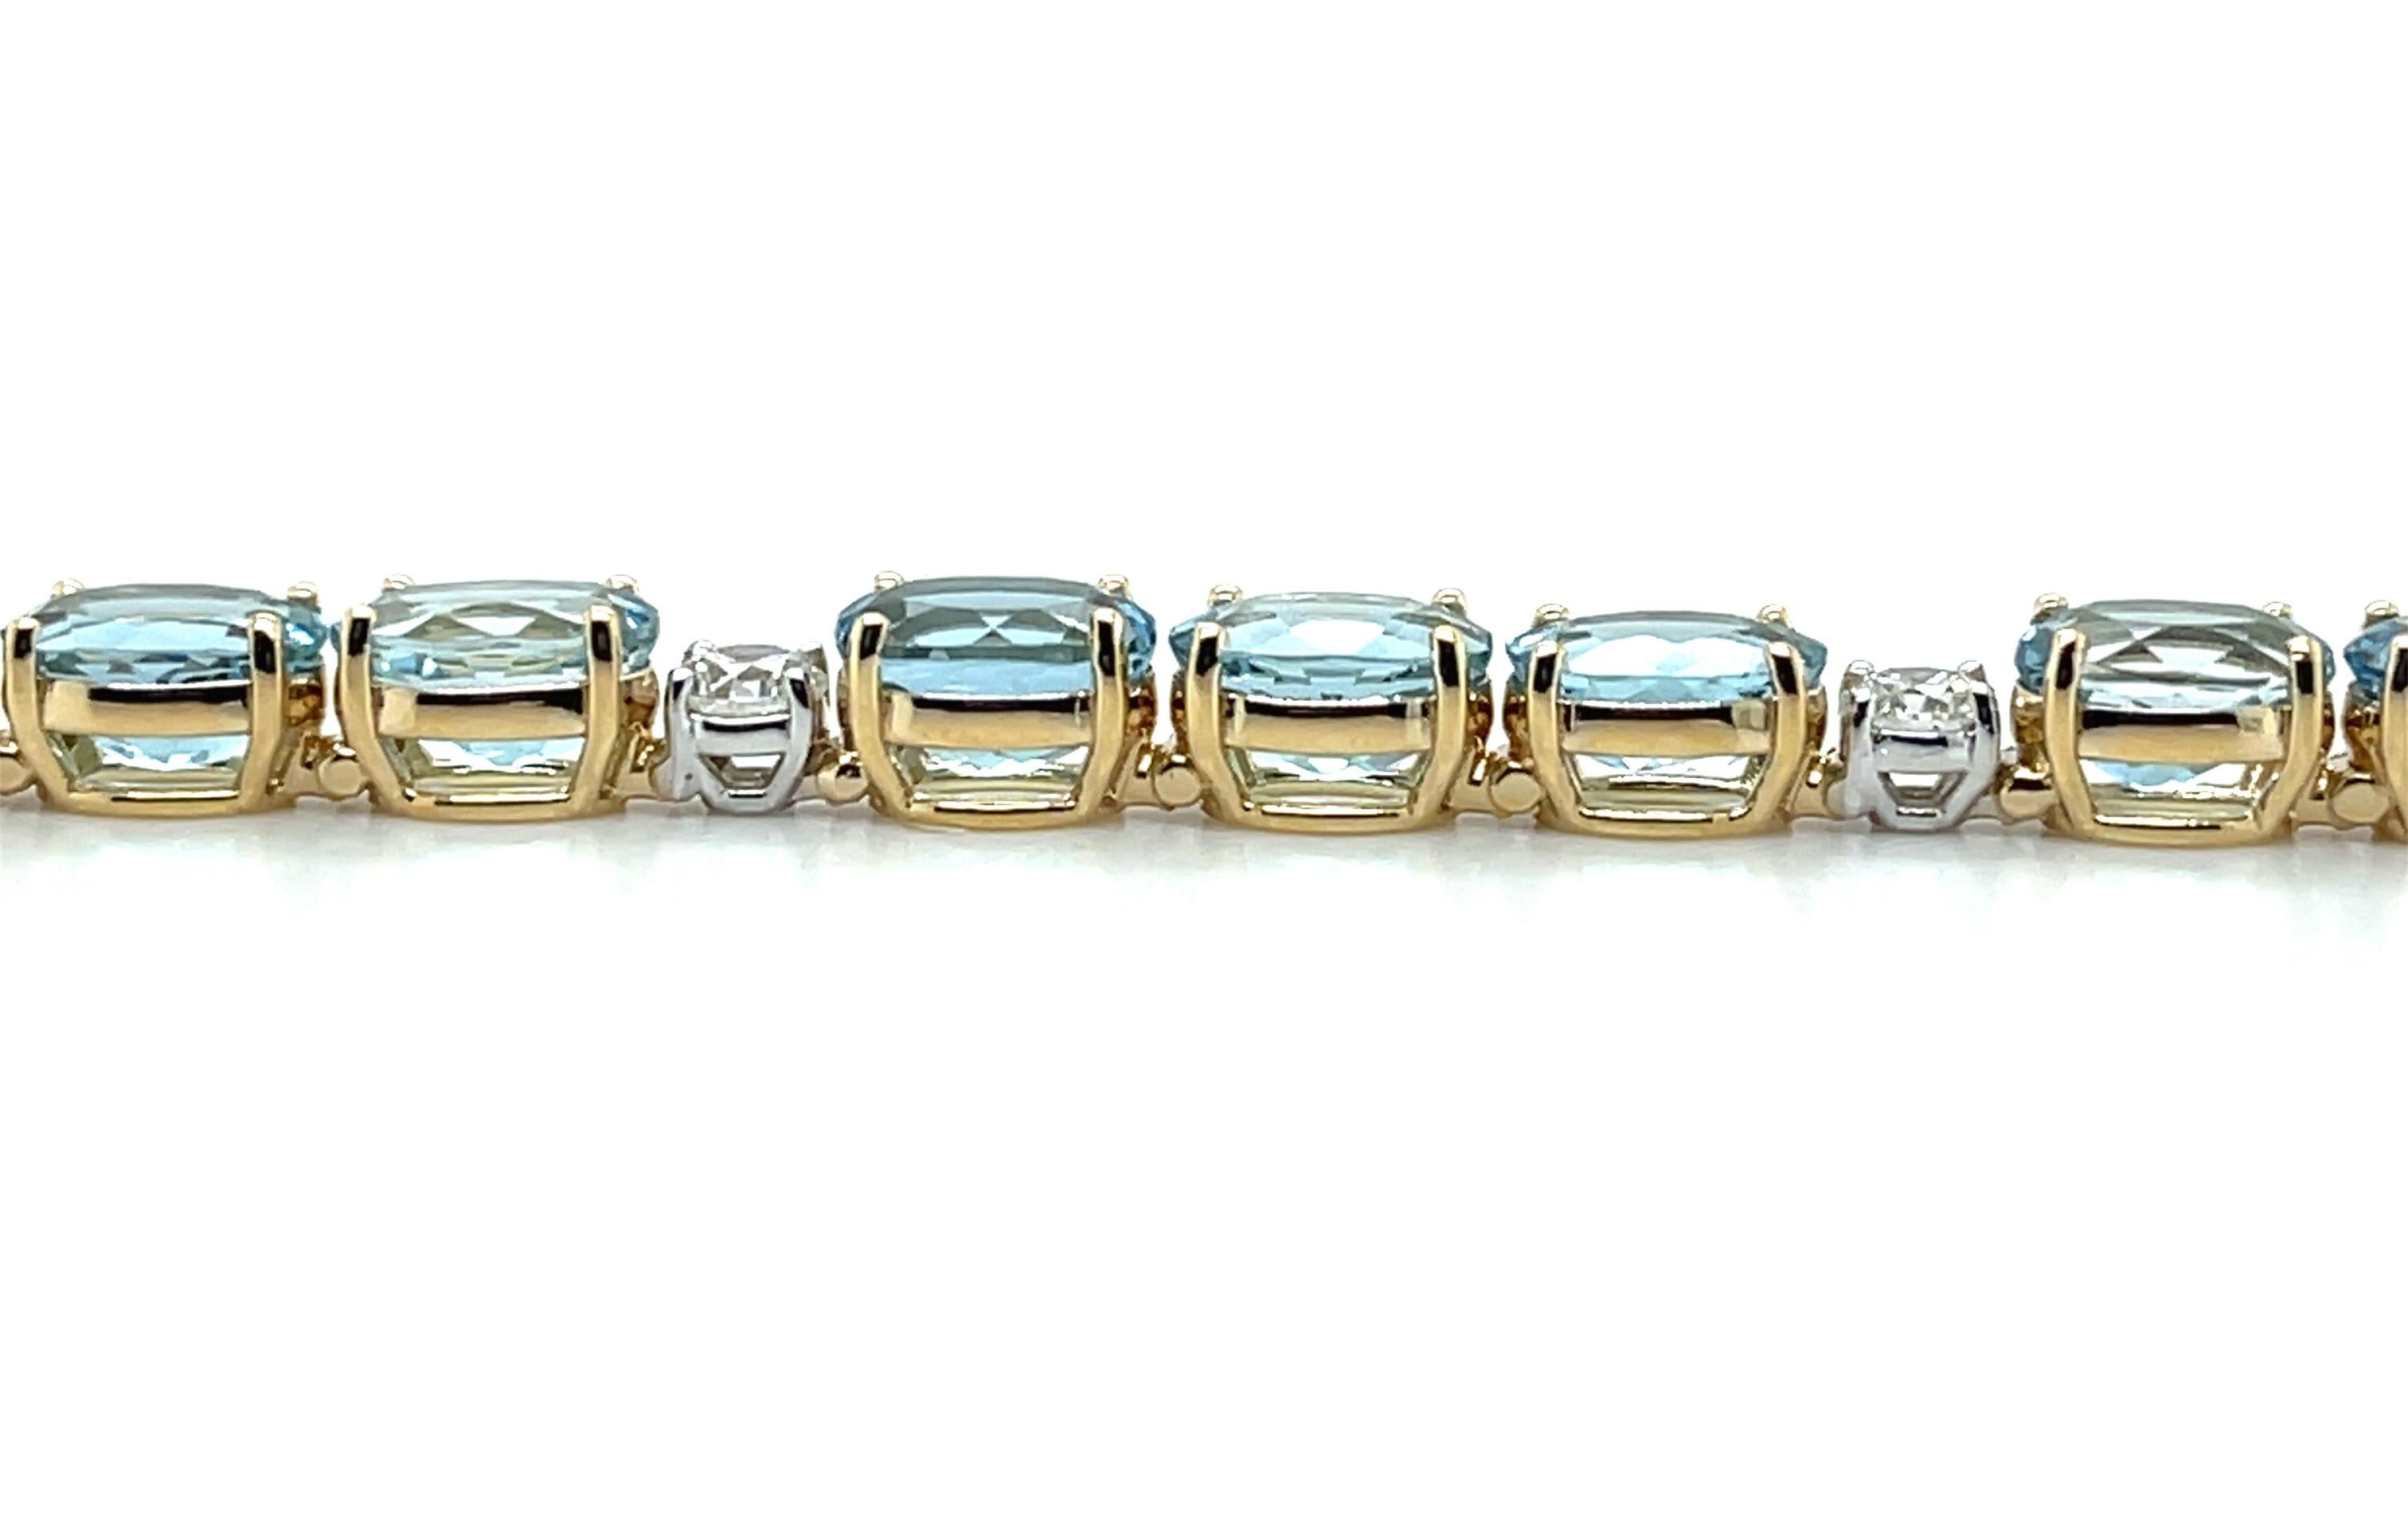 Oval Cut Aquamarine and Diamond Tennis Bracelet in 18k Gold, 20.99 Carats Total For Sale